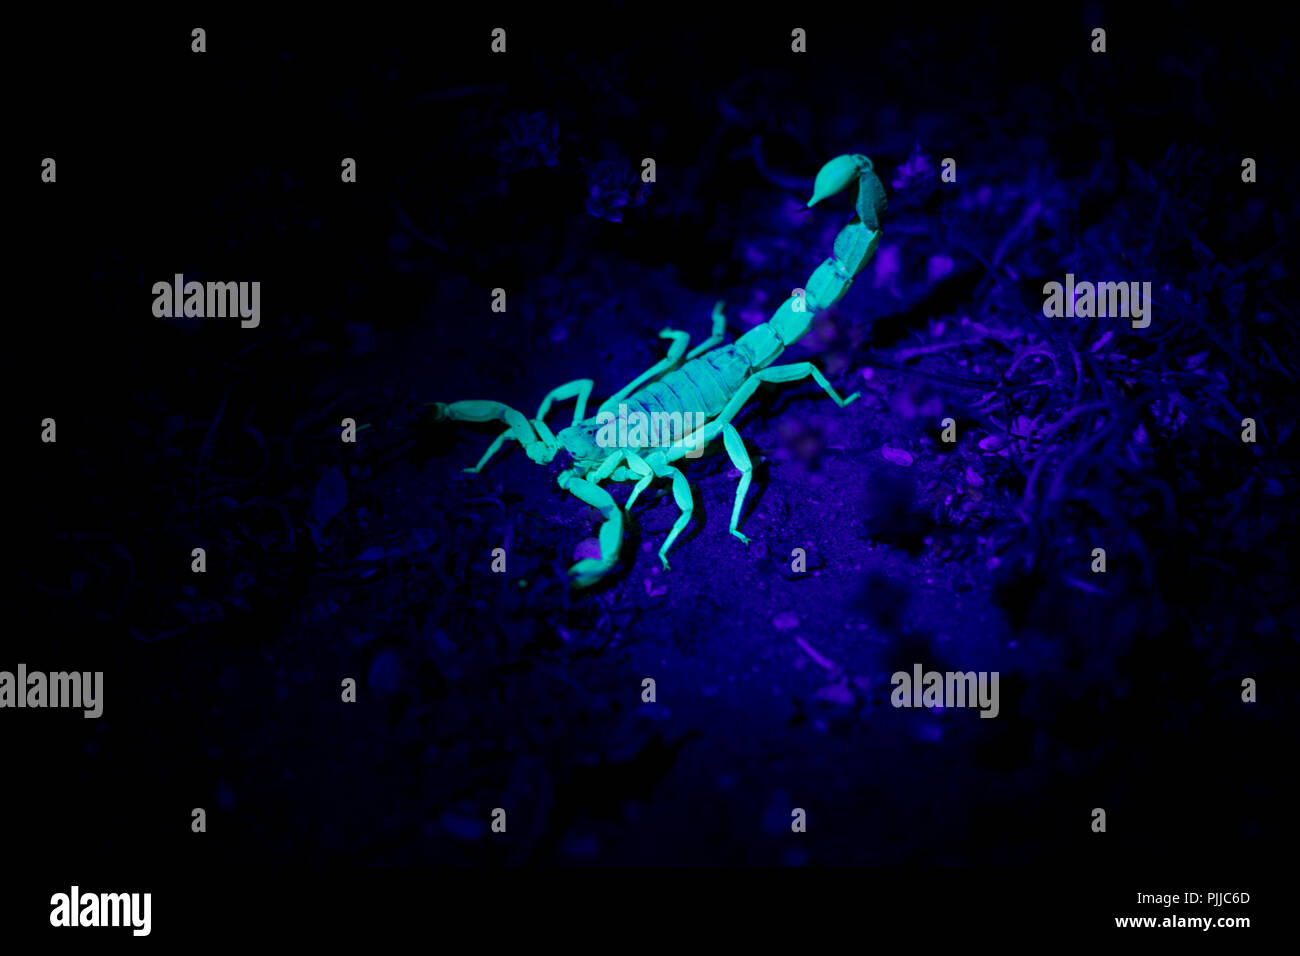 Glow in the dark insect. Scorpion on the desert floor. Poisonous baby scorpion in the wild at night. Stock Photo